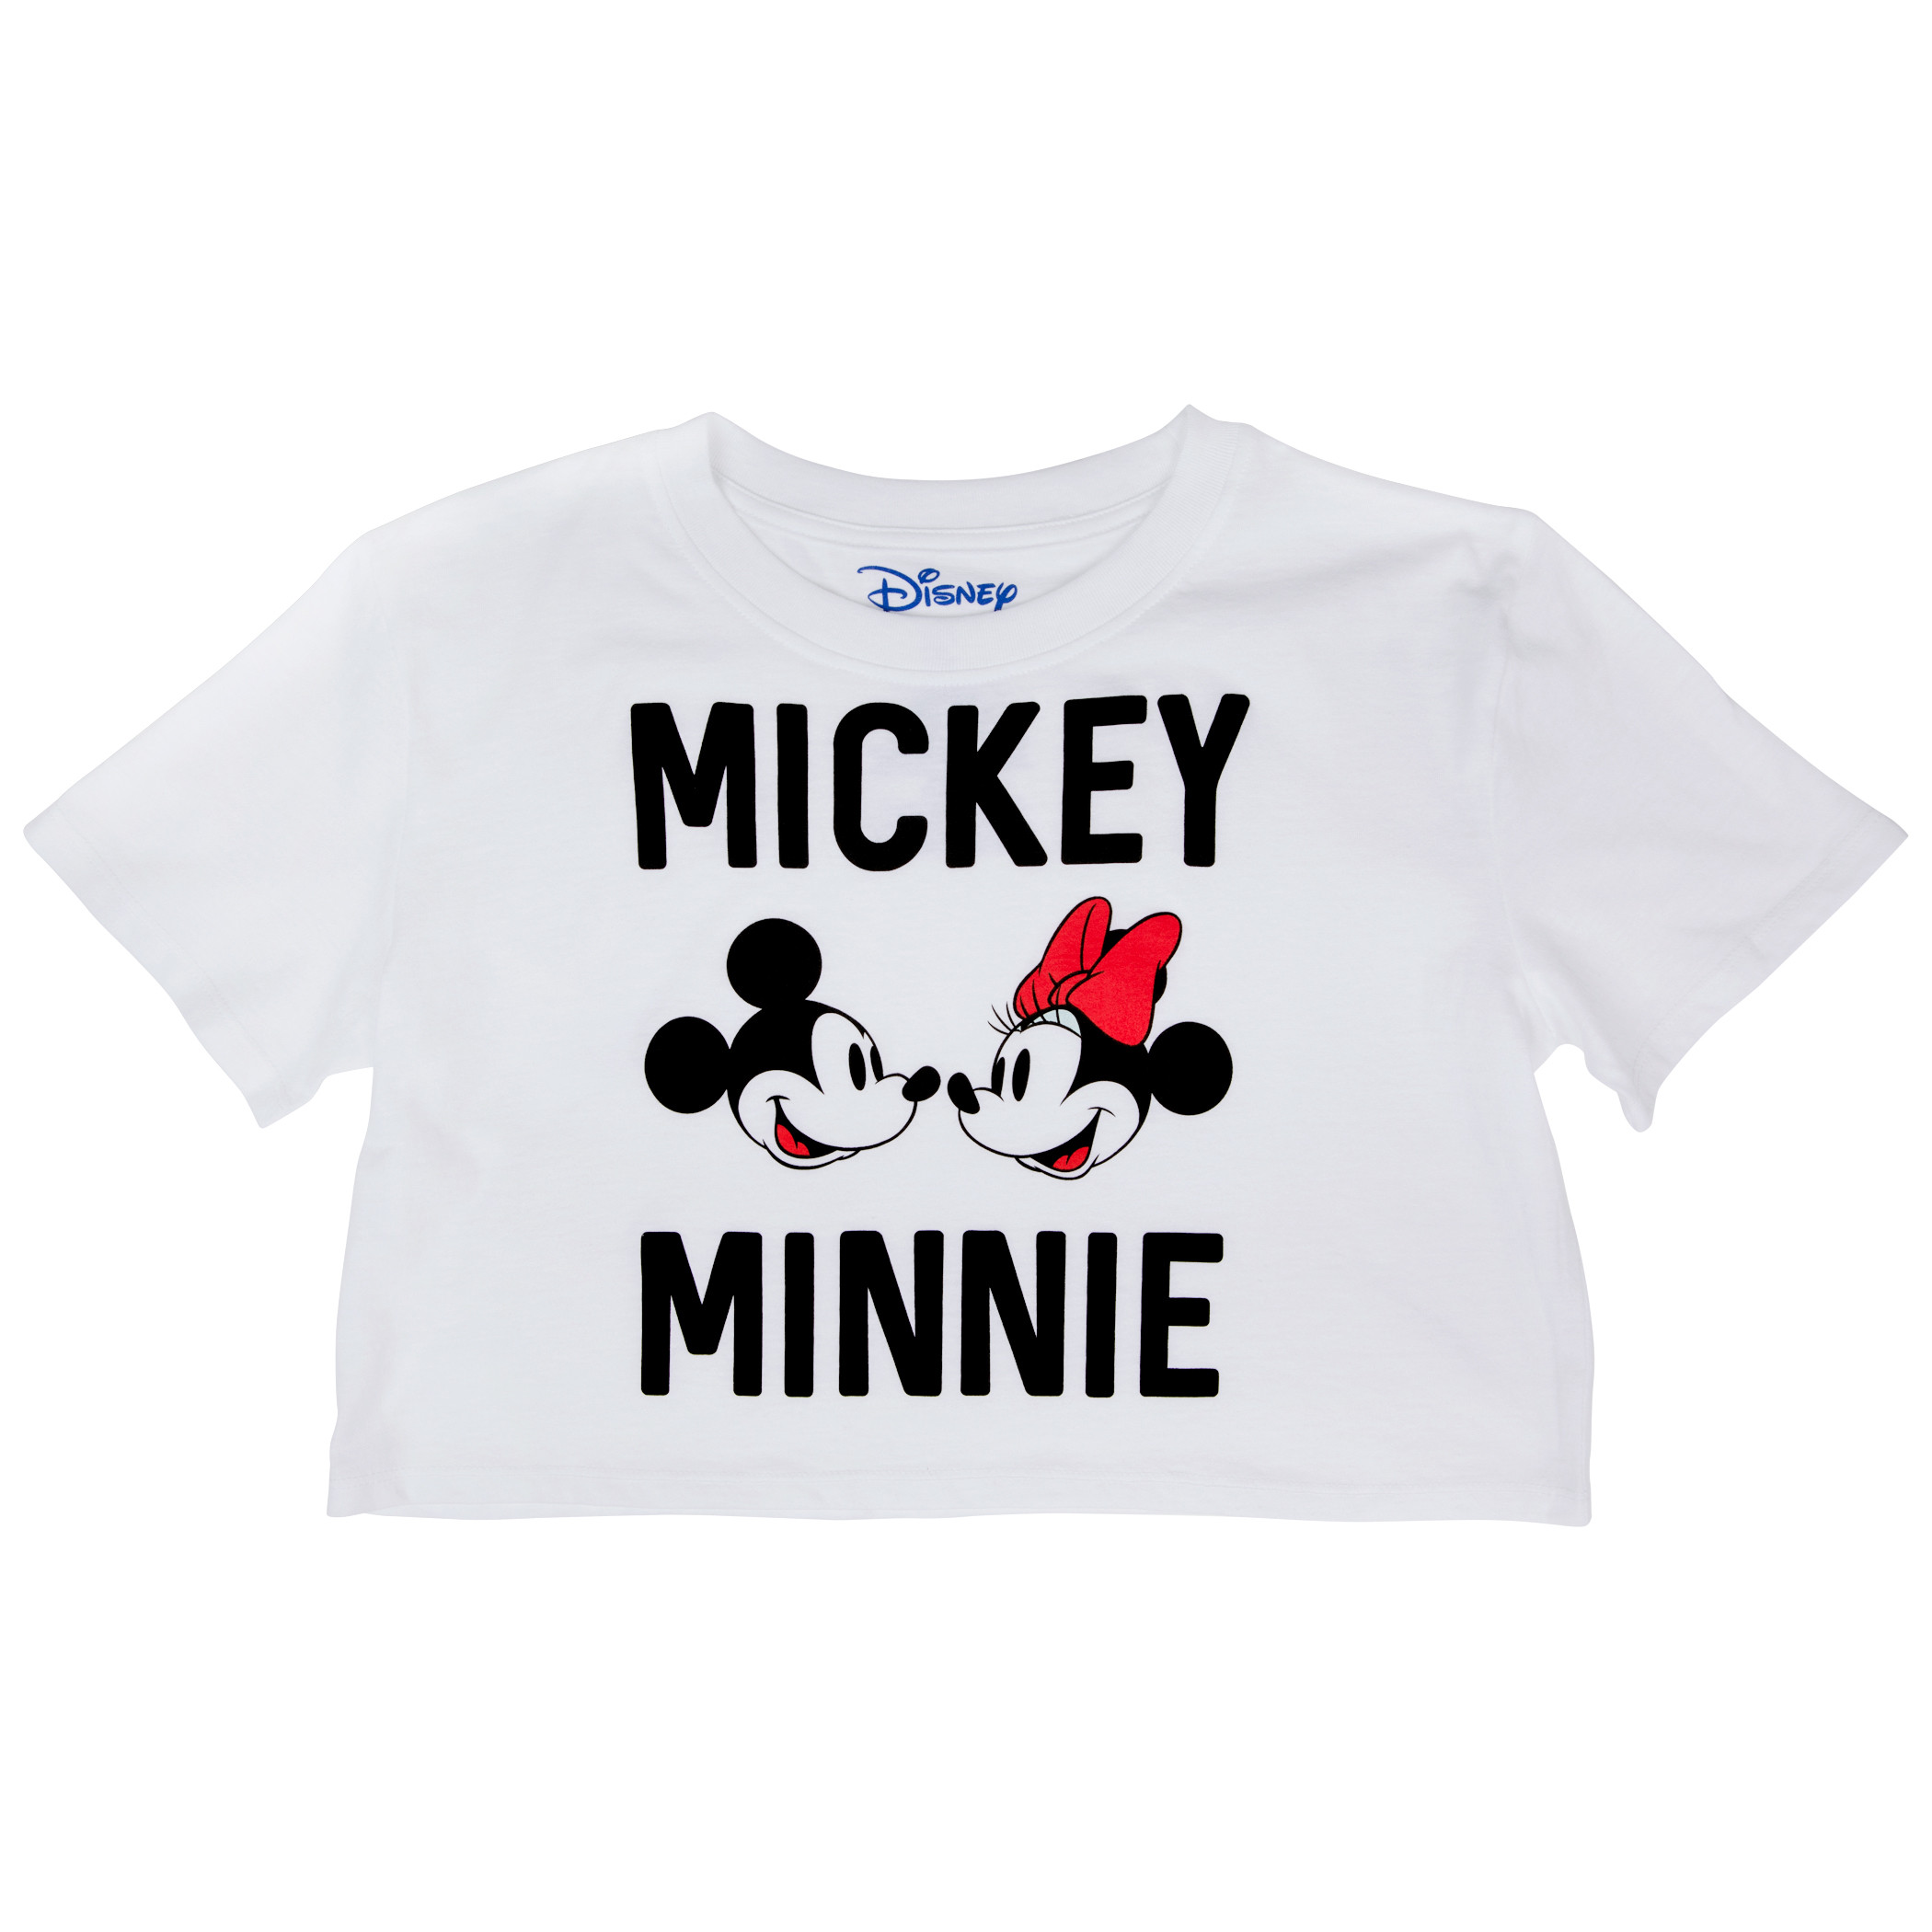 Disney Mickey and Minnie Mouse Faces and Text Crop Top Tee